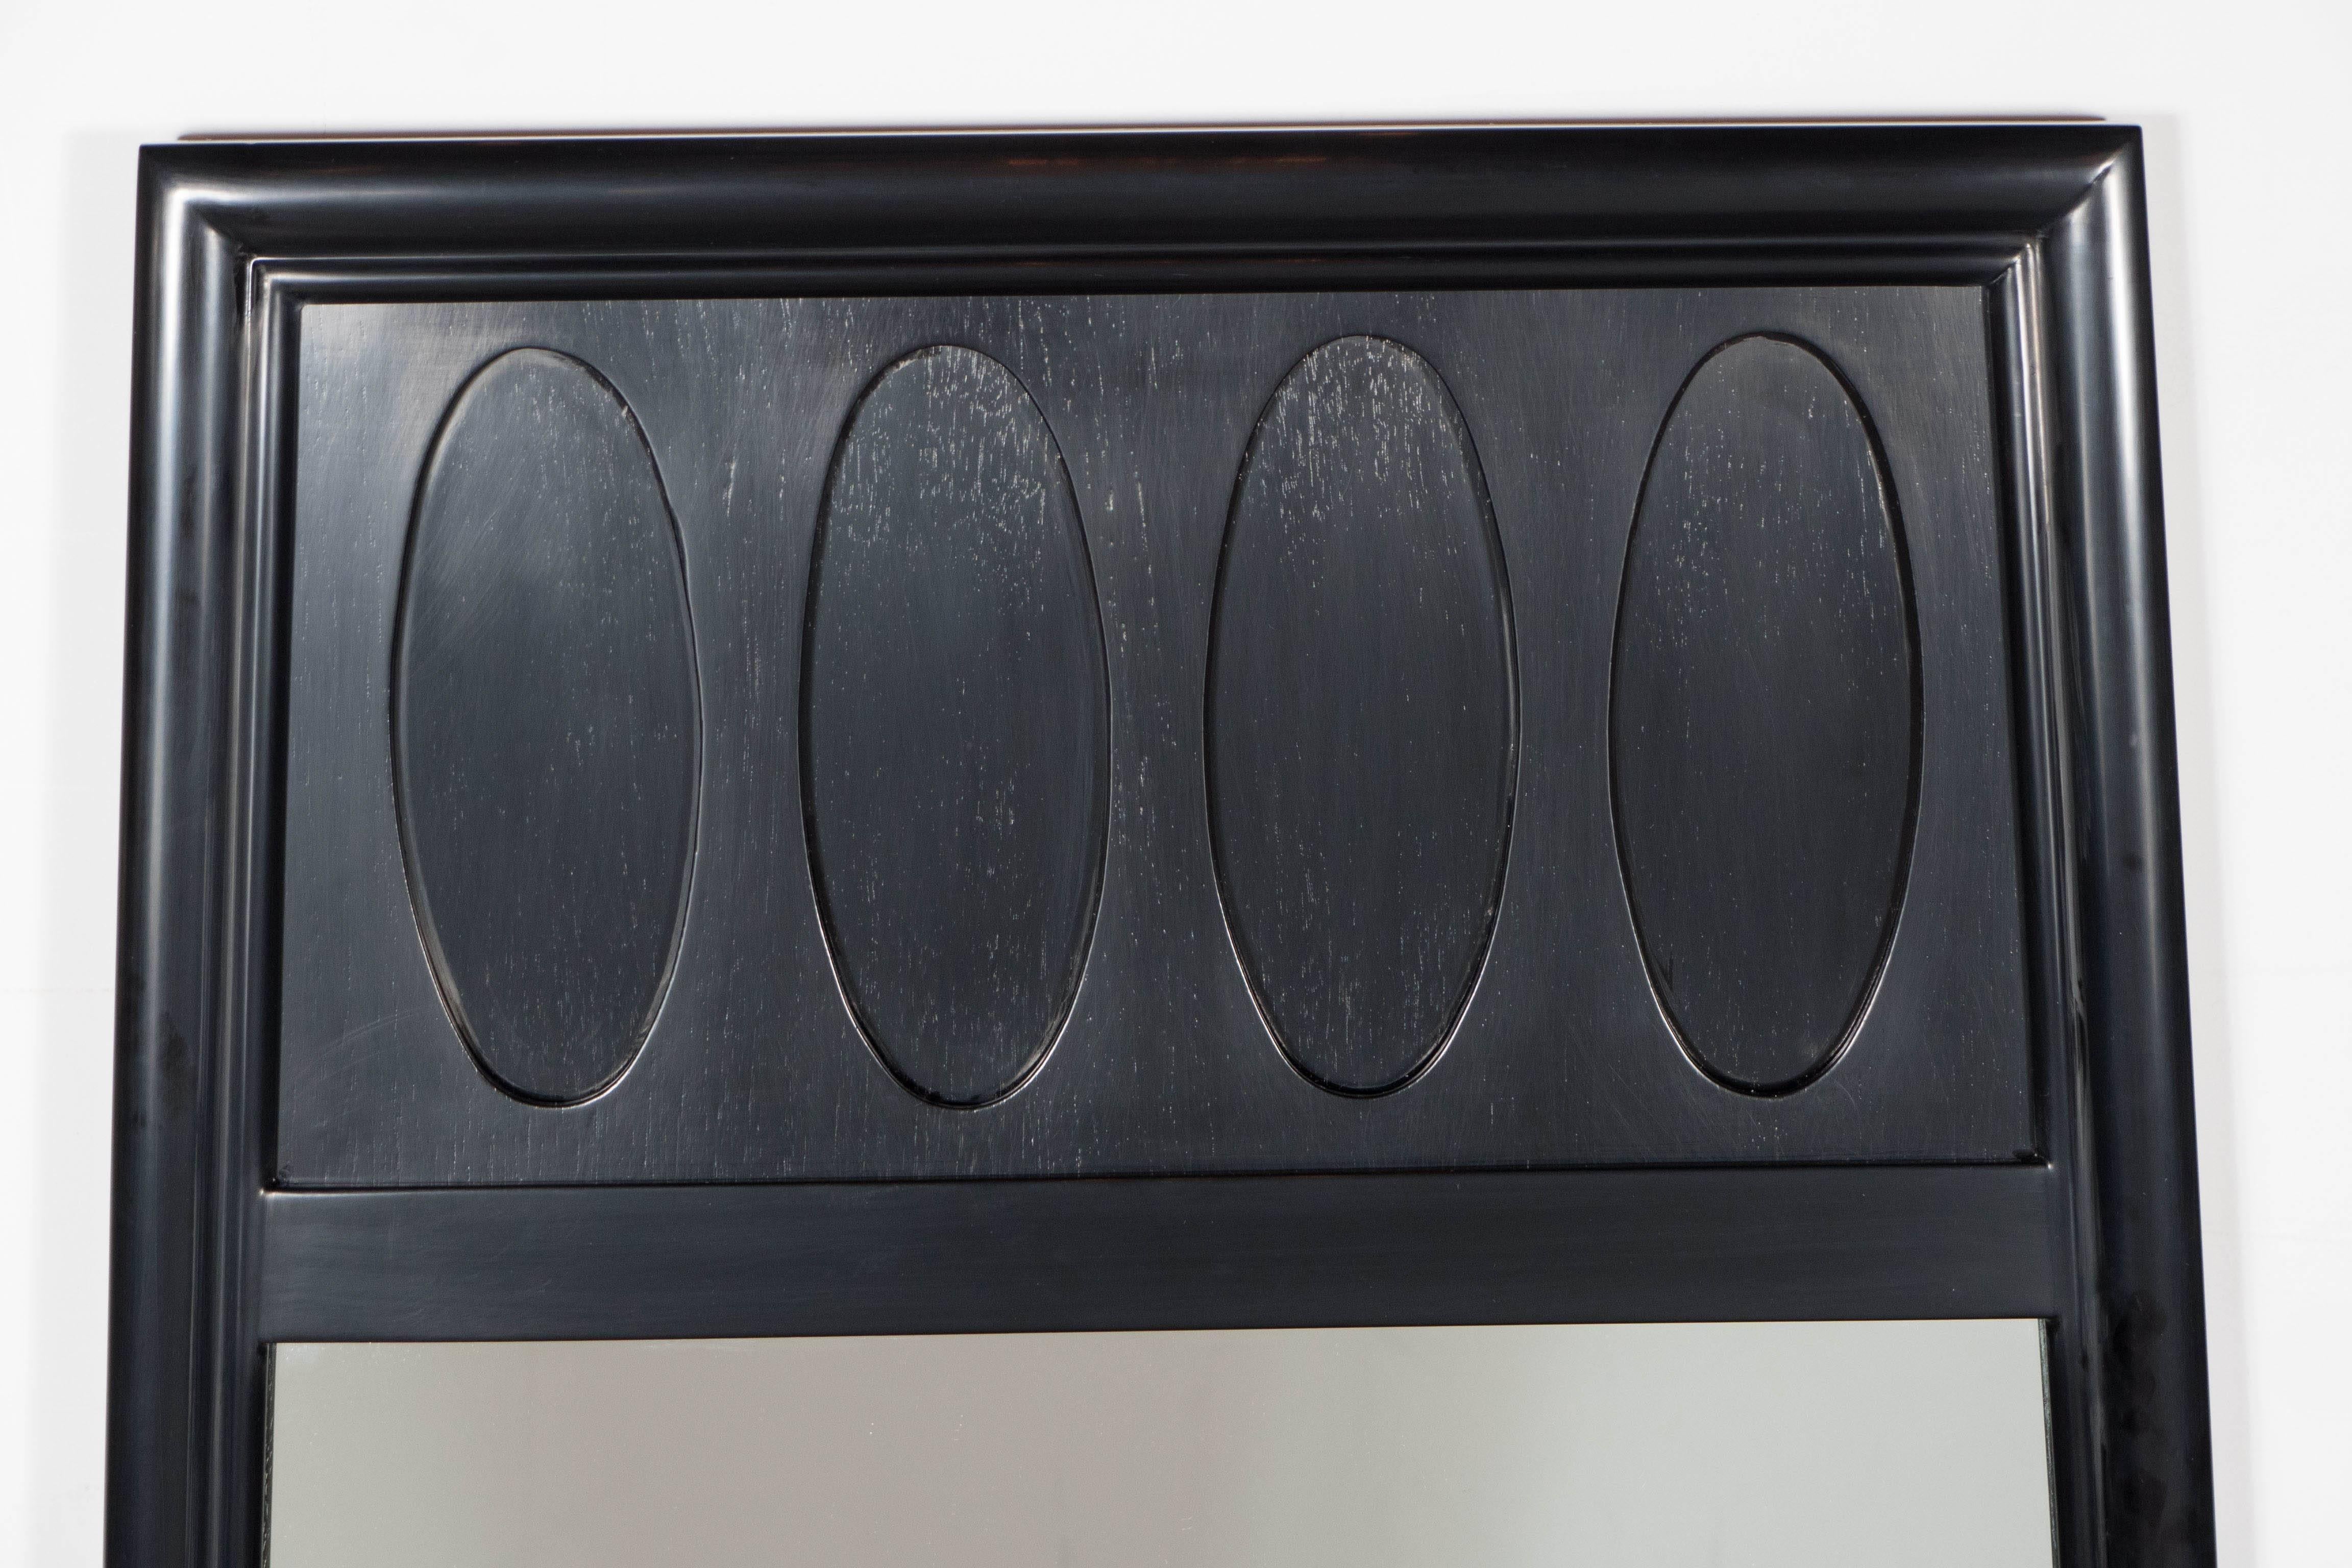 A sophisticated pair of Mid-Century Modernist mirrors in ebonized walnut. The frames are beveled while their top portions feature oval carvings. They have been restored to mint condition.

Price for a single: $2,975.